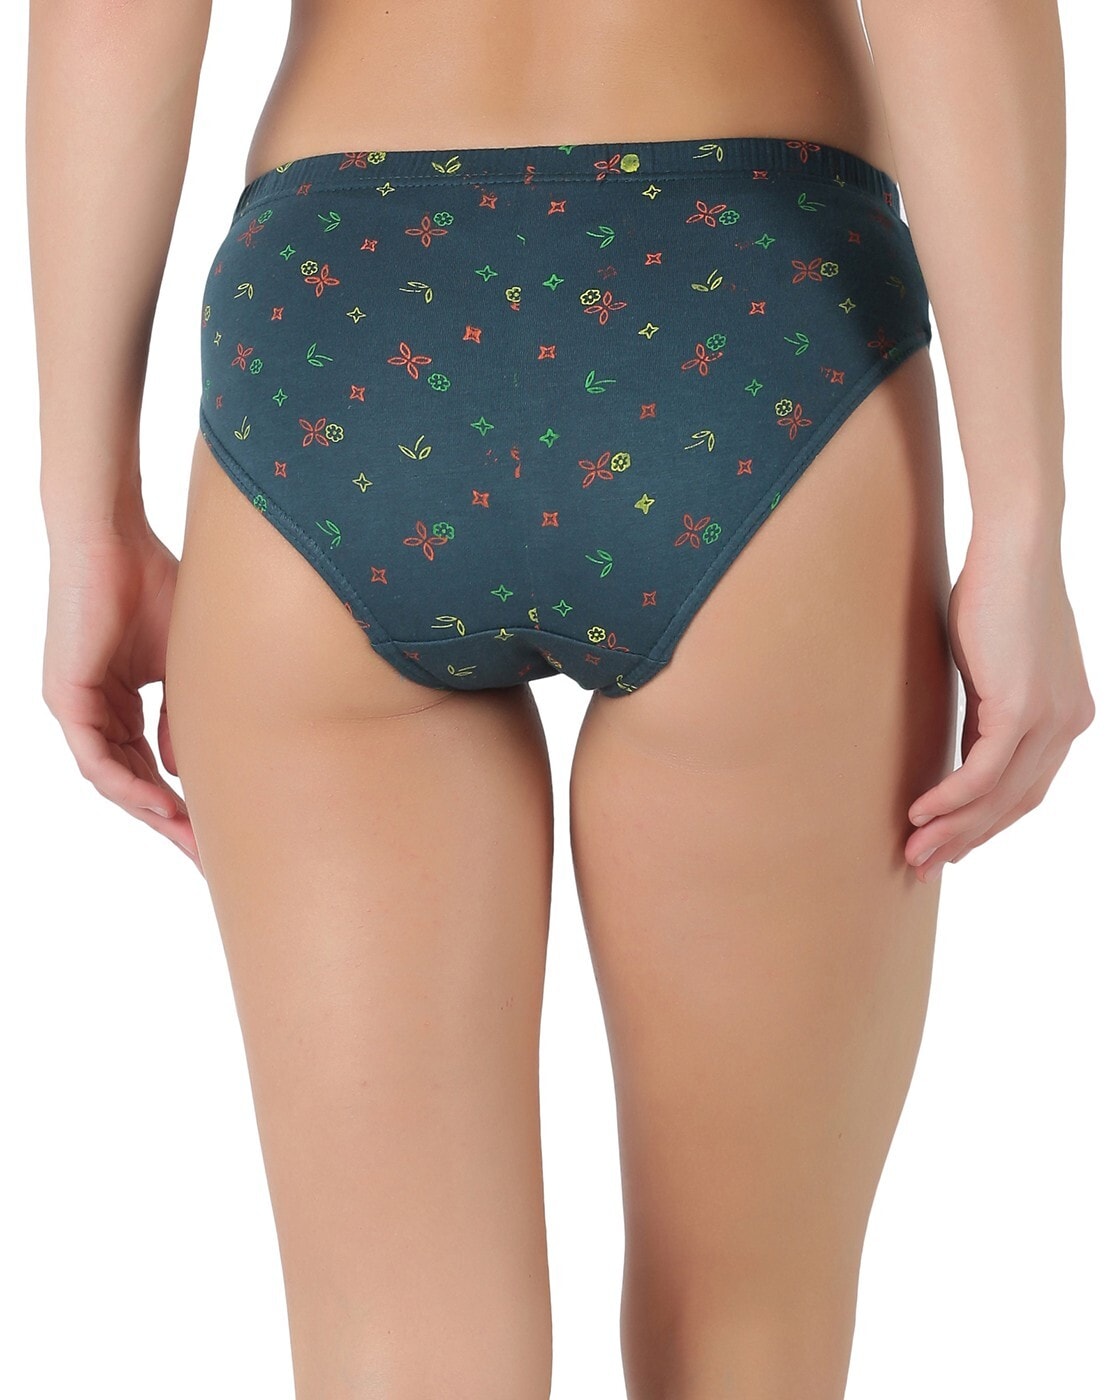 Dollar Lehar Women Hipster Red, Black, Brown, Blue, Green, Dark Blue Panty  - Buy Dollar Lehar Women Hipster Red, Black, Brown, Blue, Green, Dark Blue  Panty Online at Best Prices in India